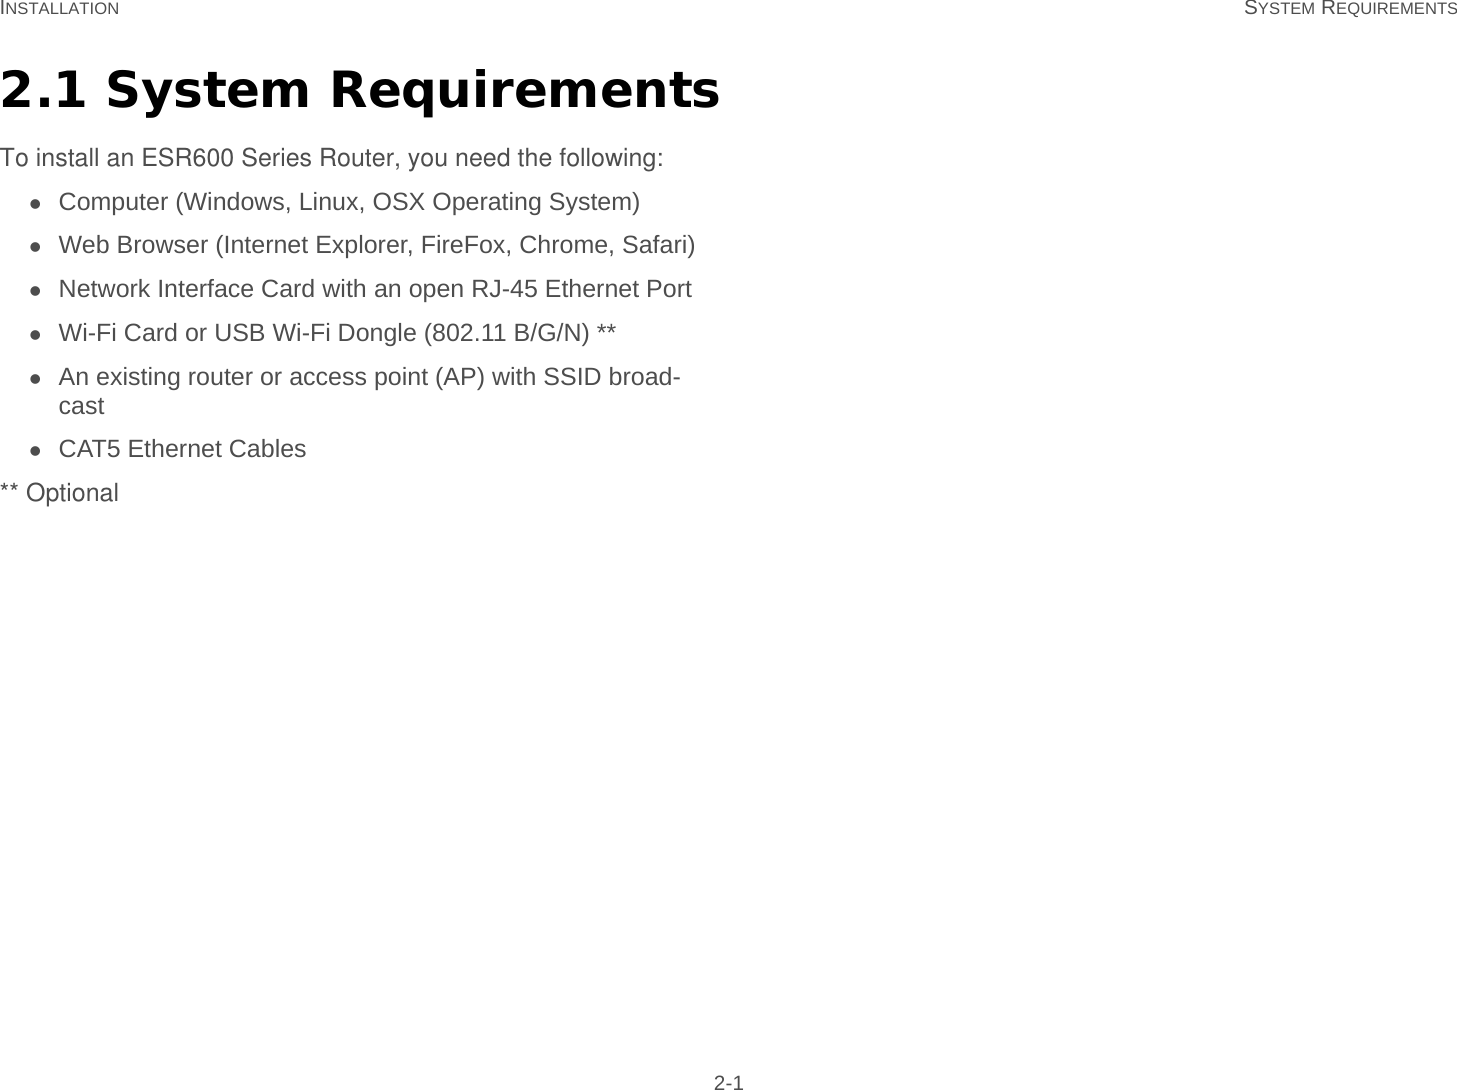 INSTALLATION SYSTEM REQUIREMENTS 2-12.1 System RequirementsTo install an ESR600 Series Router, you need the following:Computer (Windows, Linux, OSX Operating System)Web Browser (Internet Explorer, FireFox, Chrome, Safari)Network Interface Card with an open RJ-45 Ethernet PortWi-Fi Card or USB Wi-Fi Dongle (802.11 B/G/N) **An existing router or access point (AP) with SSID broad-castCAT5 Ethernet Cables** Optional